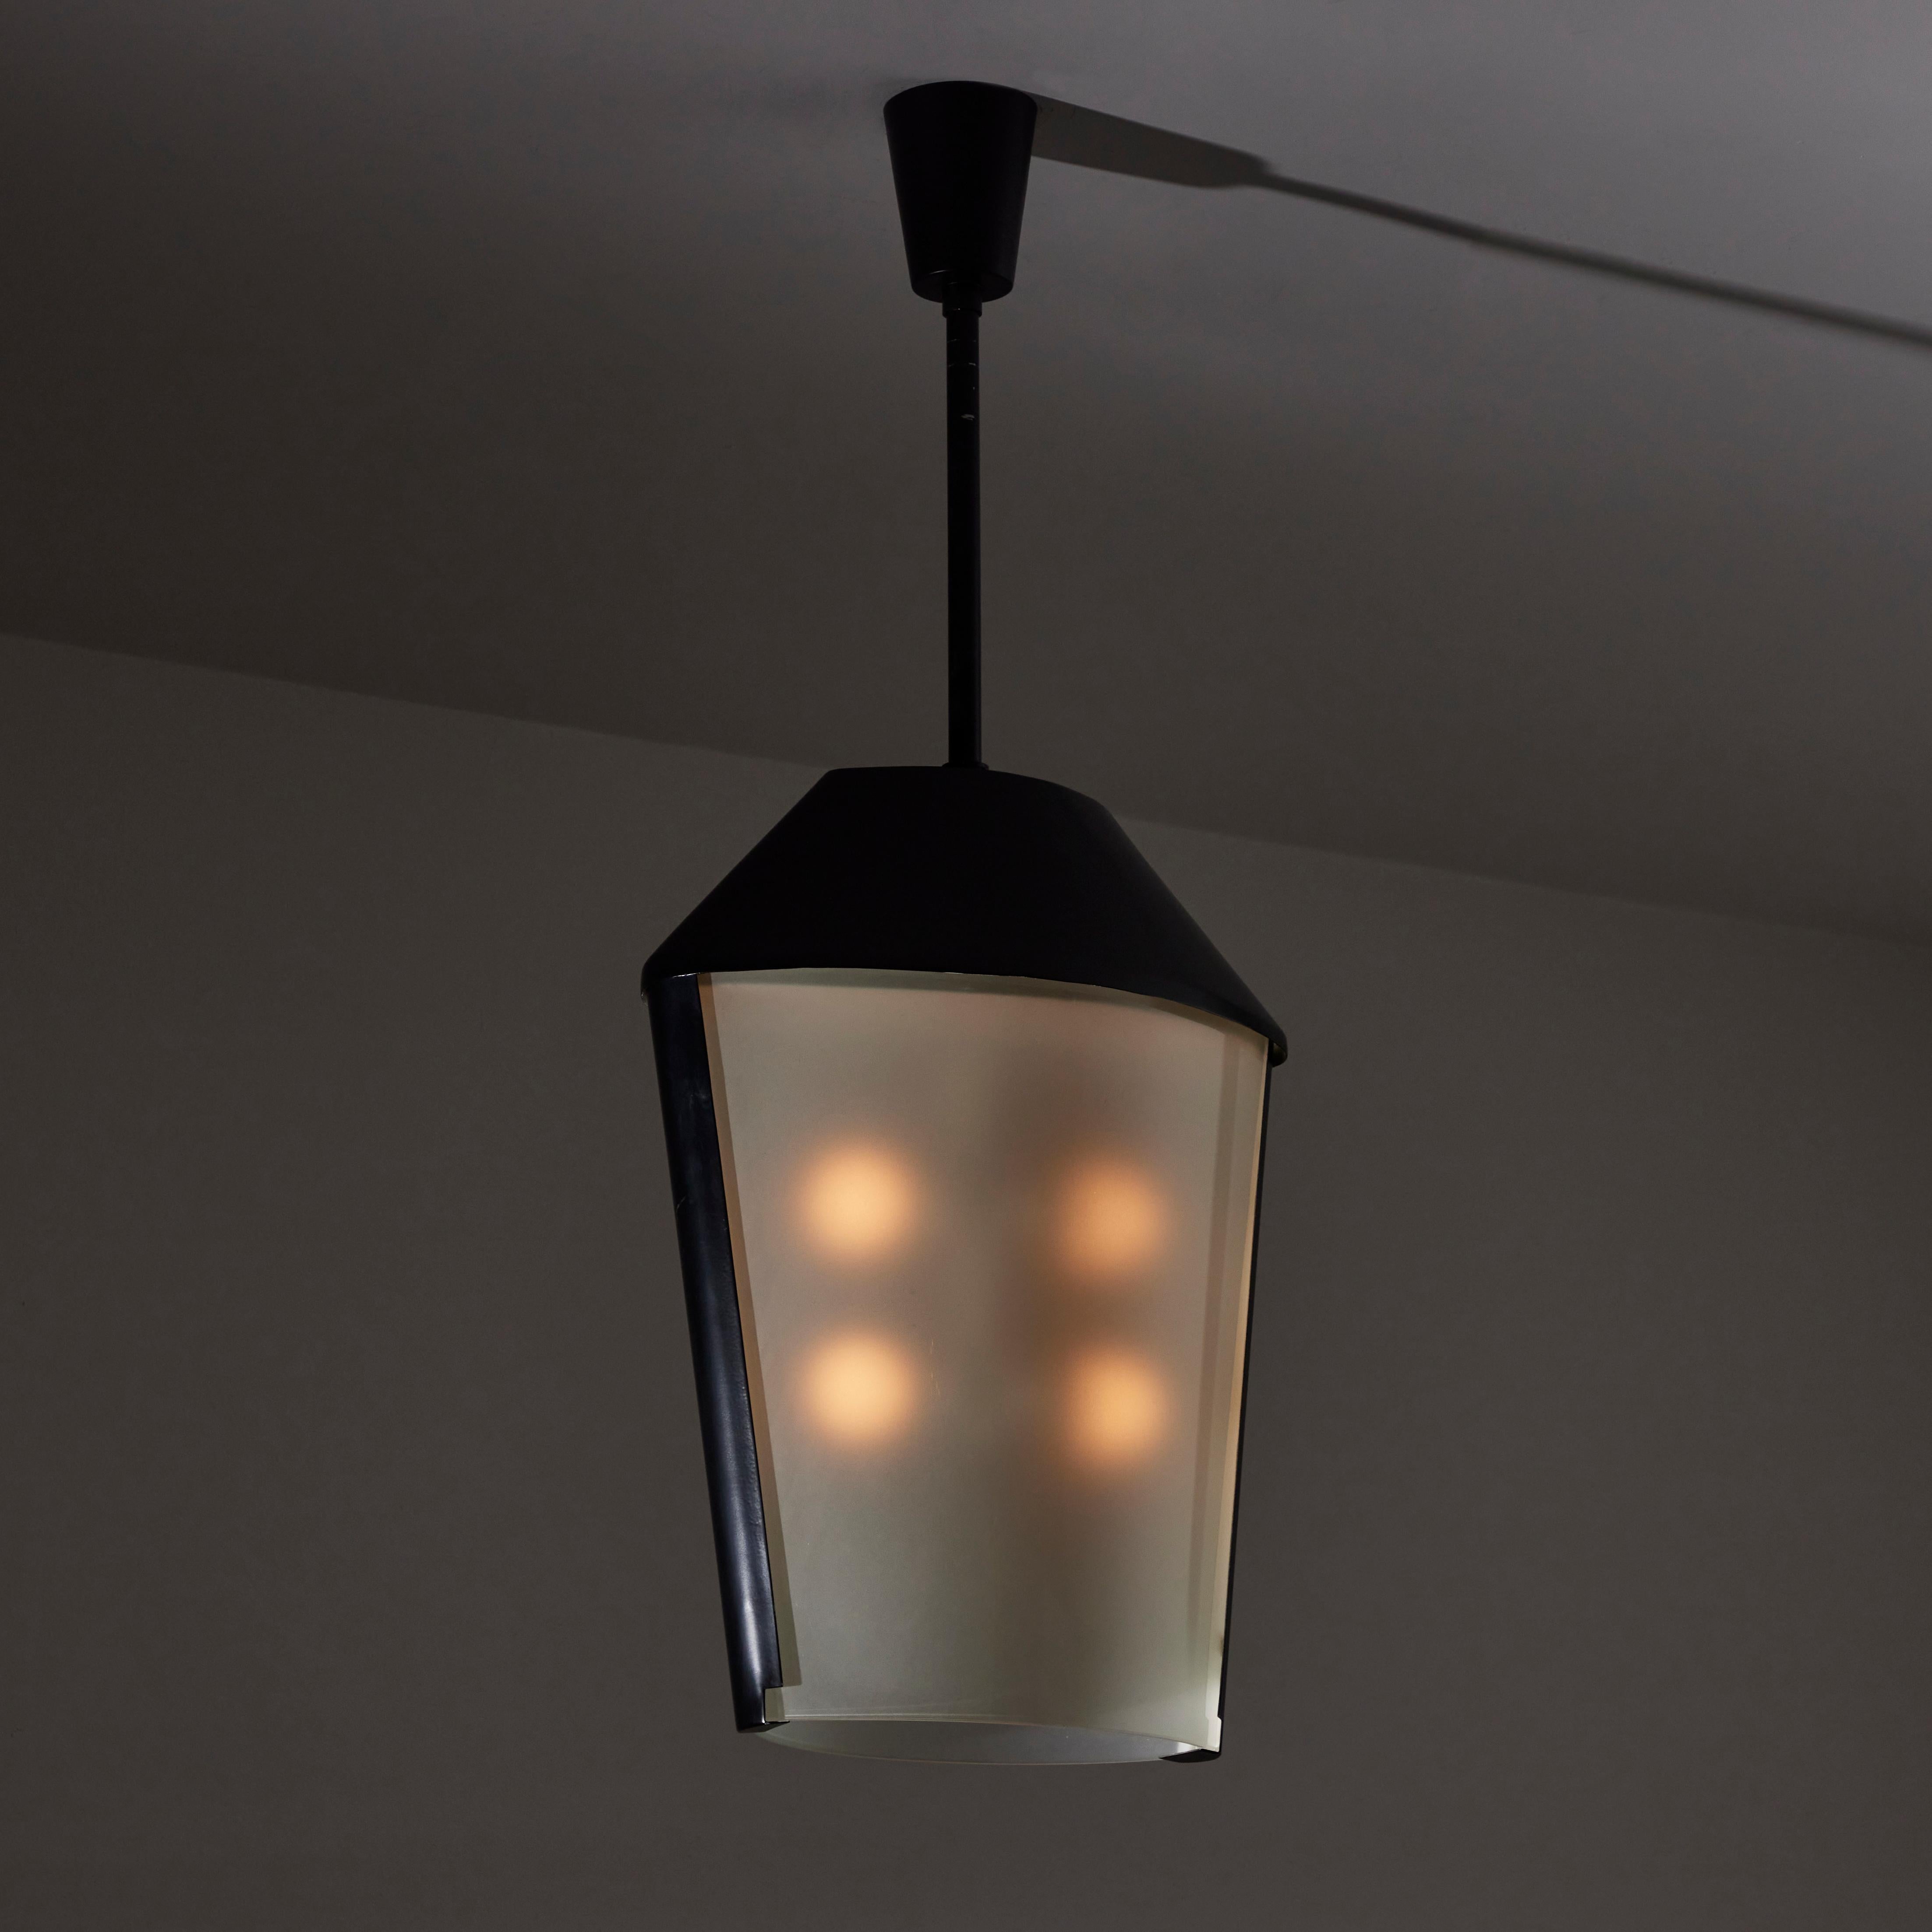 Large Custom Italian Ceiling Light. Designed and manufactured in Italy, circa the 1940s. Sleek and Industrial ceiling light with sandblasted steel enameled frame and double end frosted glass shades. This piece holds four E27 bulb sockets, adapted